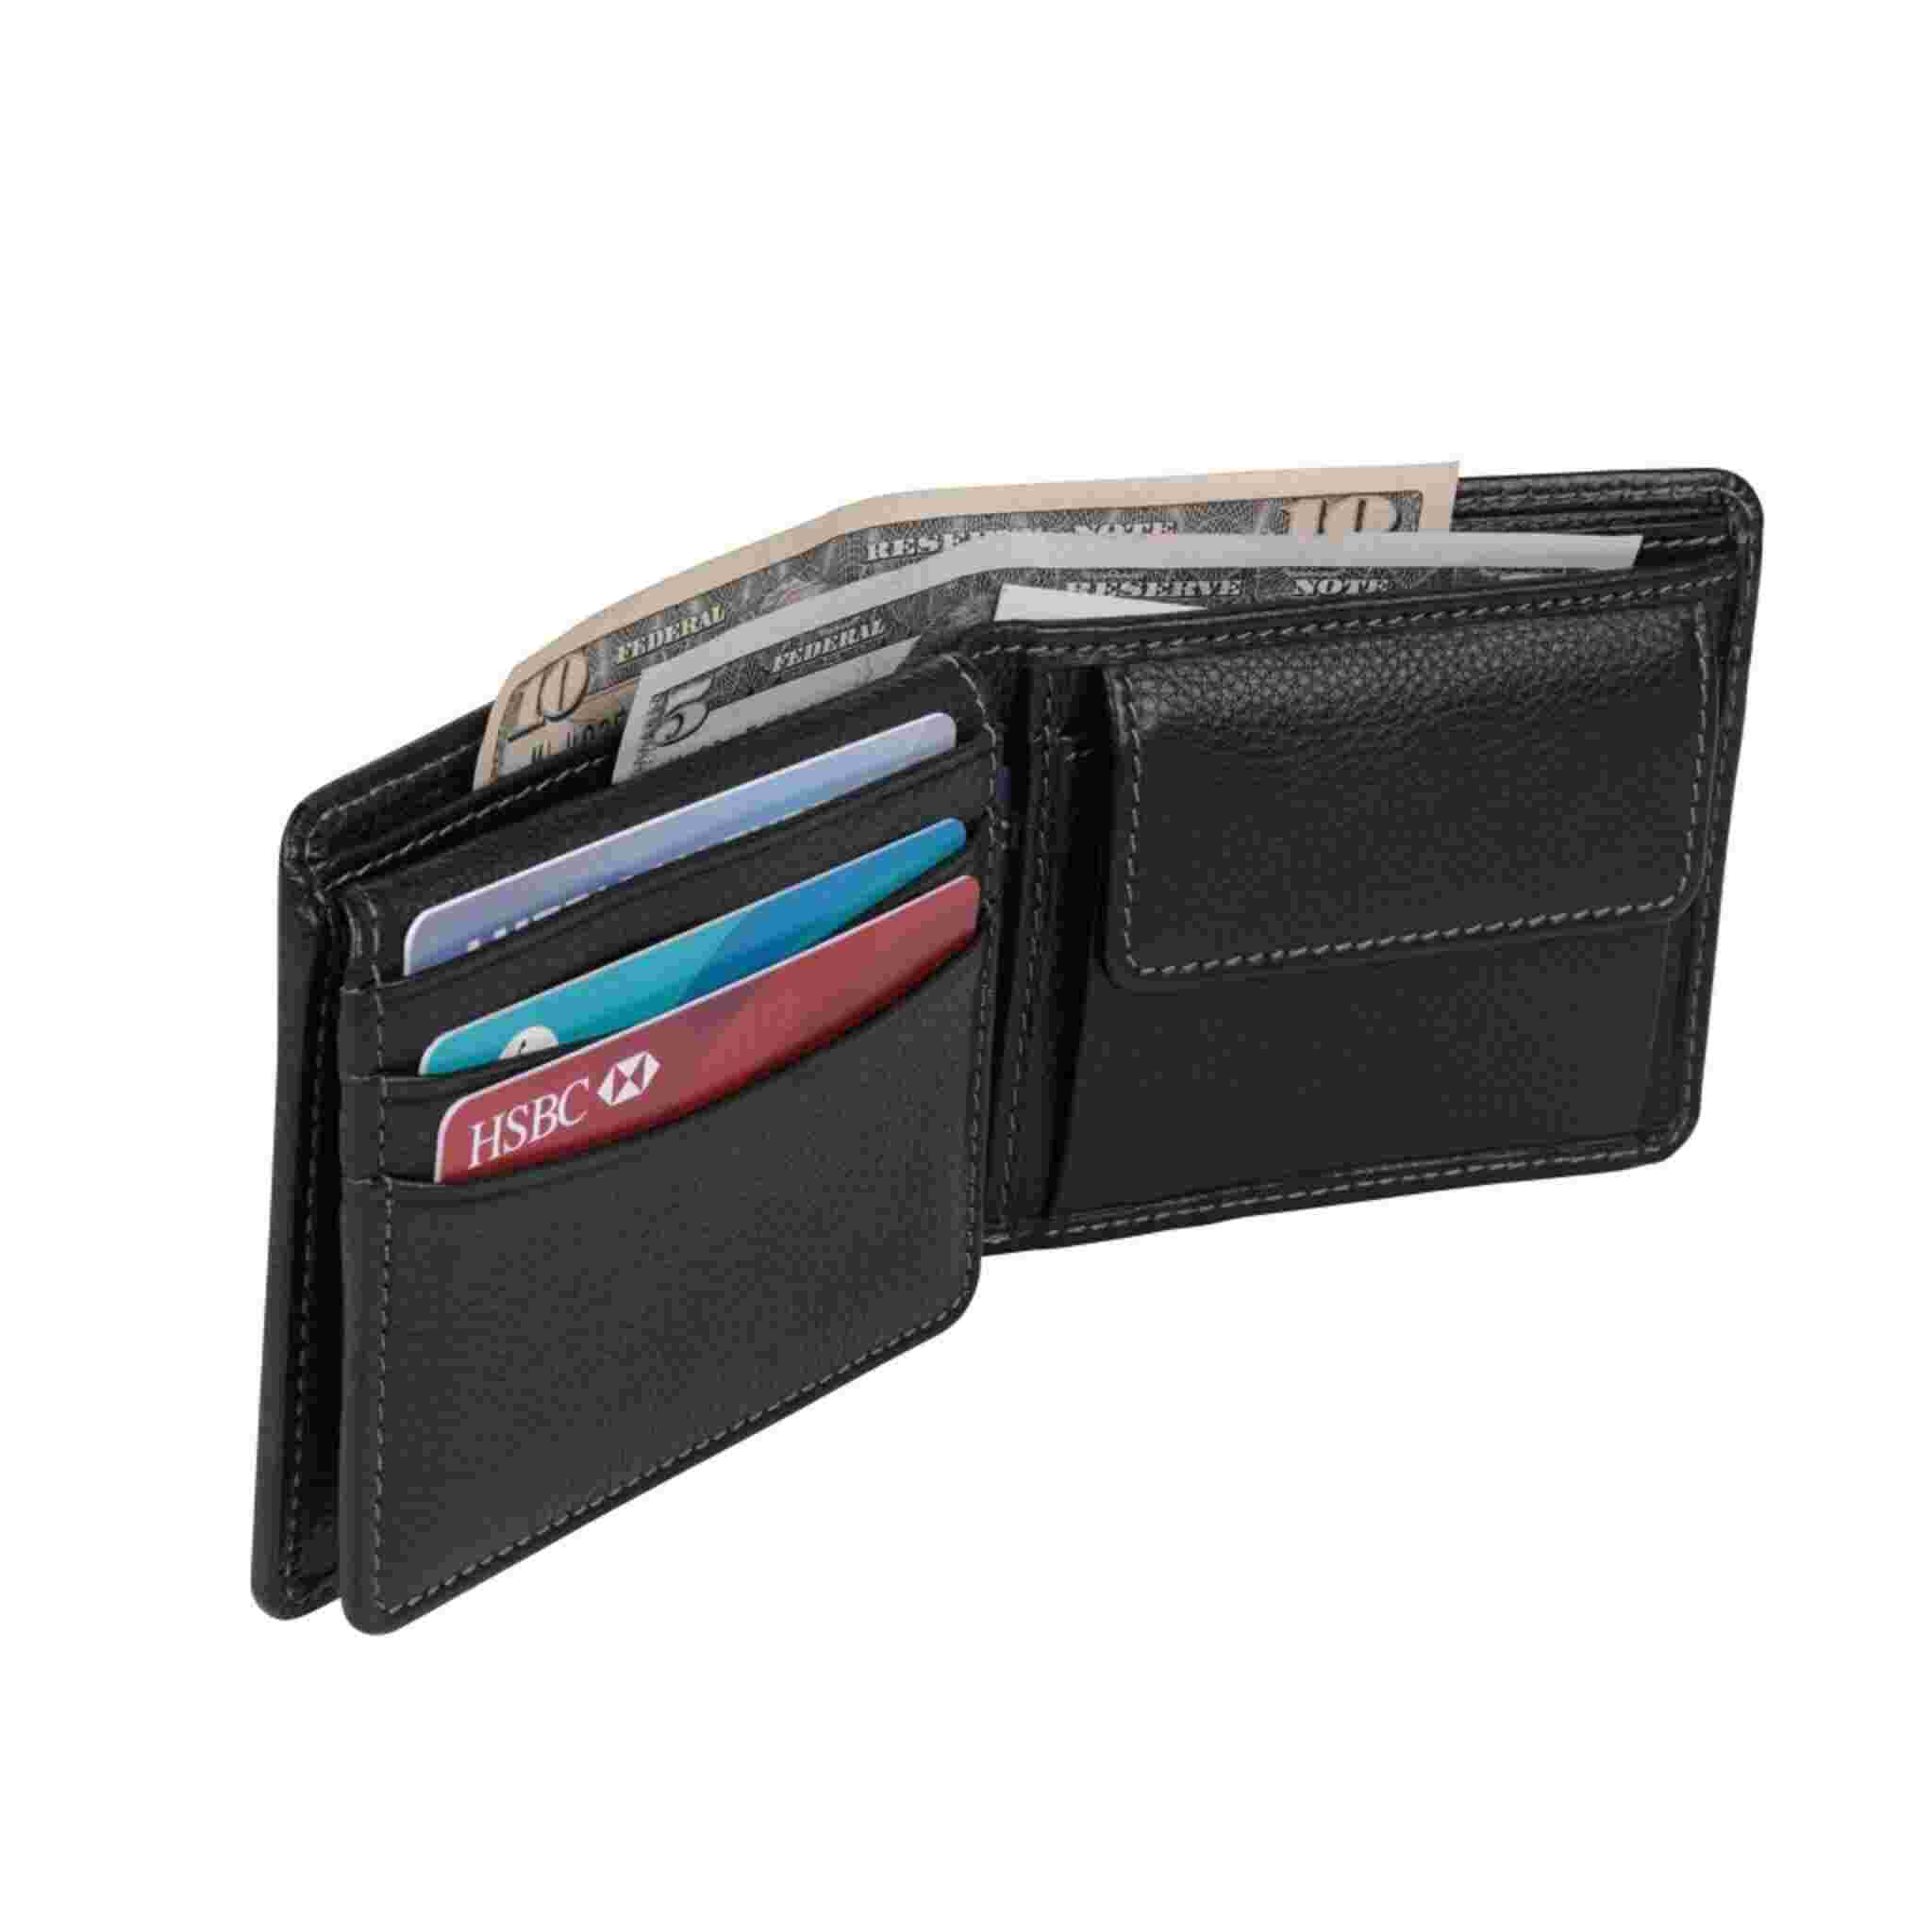 Open black wallet showing cash section and card holders with sample cards and cash